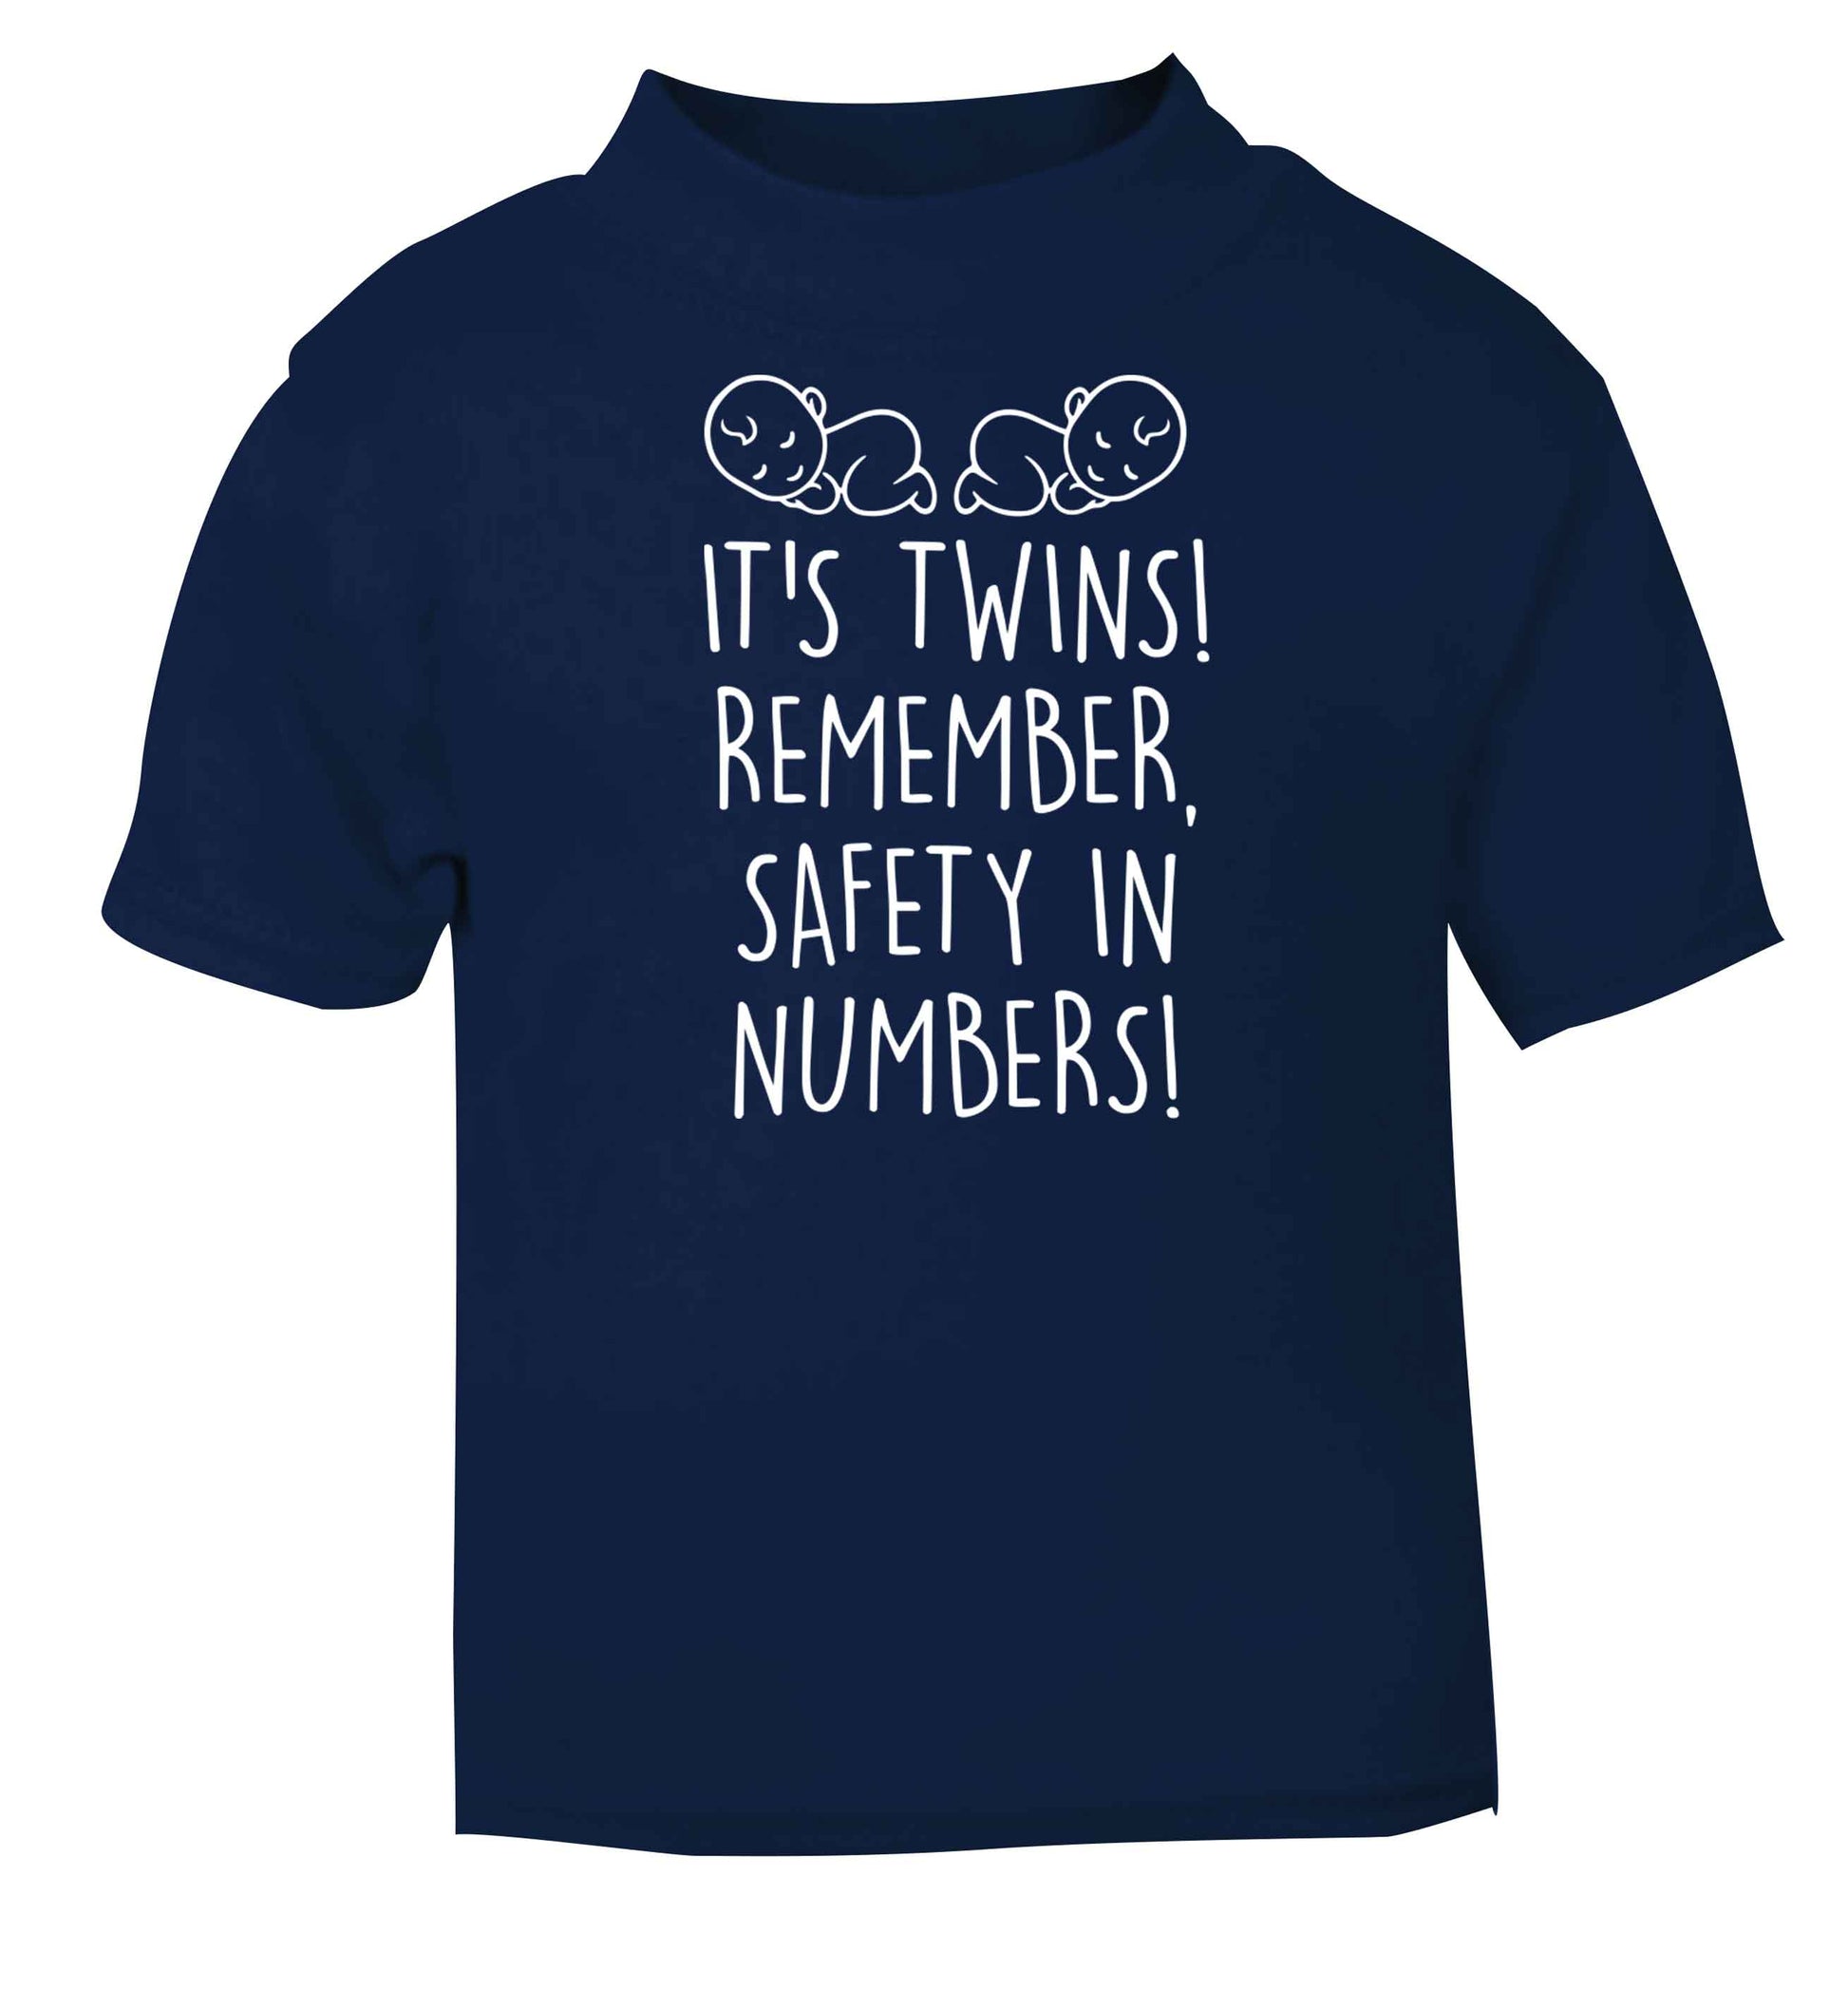 It's twins! Remember safety in numbers! navy baby toddler Tshirt 2 Years